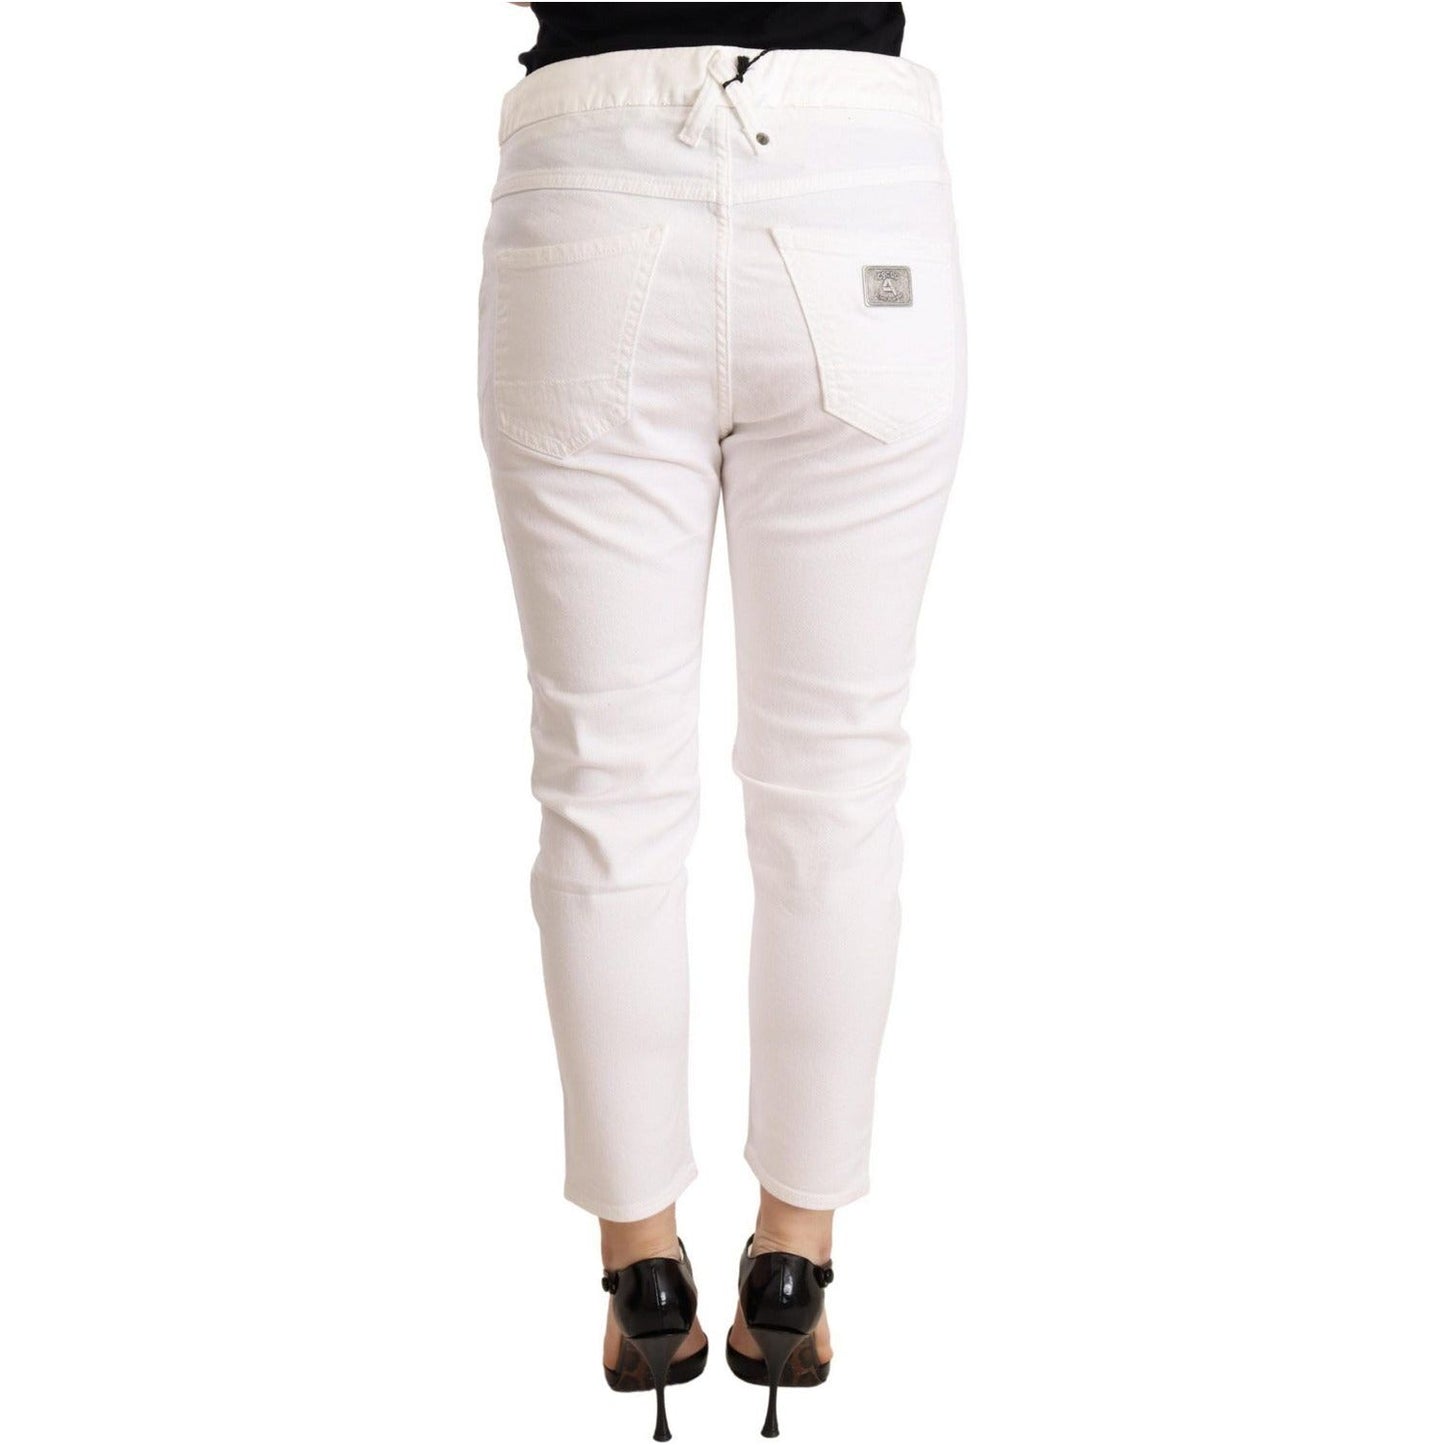 CYCLE Elegant Slim Fit White Skinny Pants WOMAN TROUSERS white-mid-waist-slim-fit-skinny-cotton-stretch-trouser